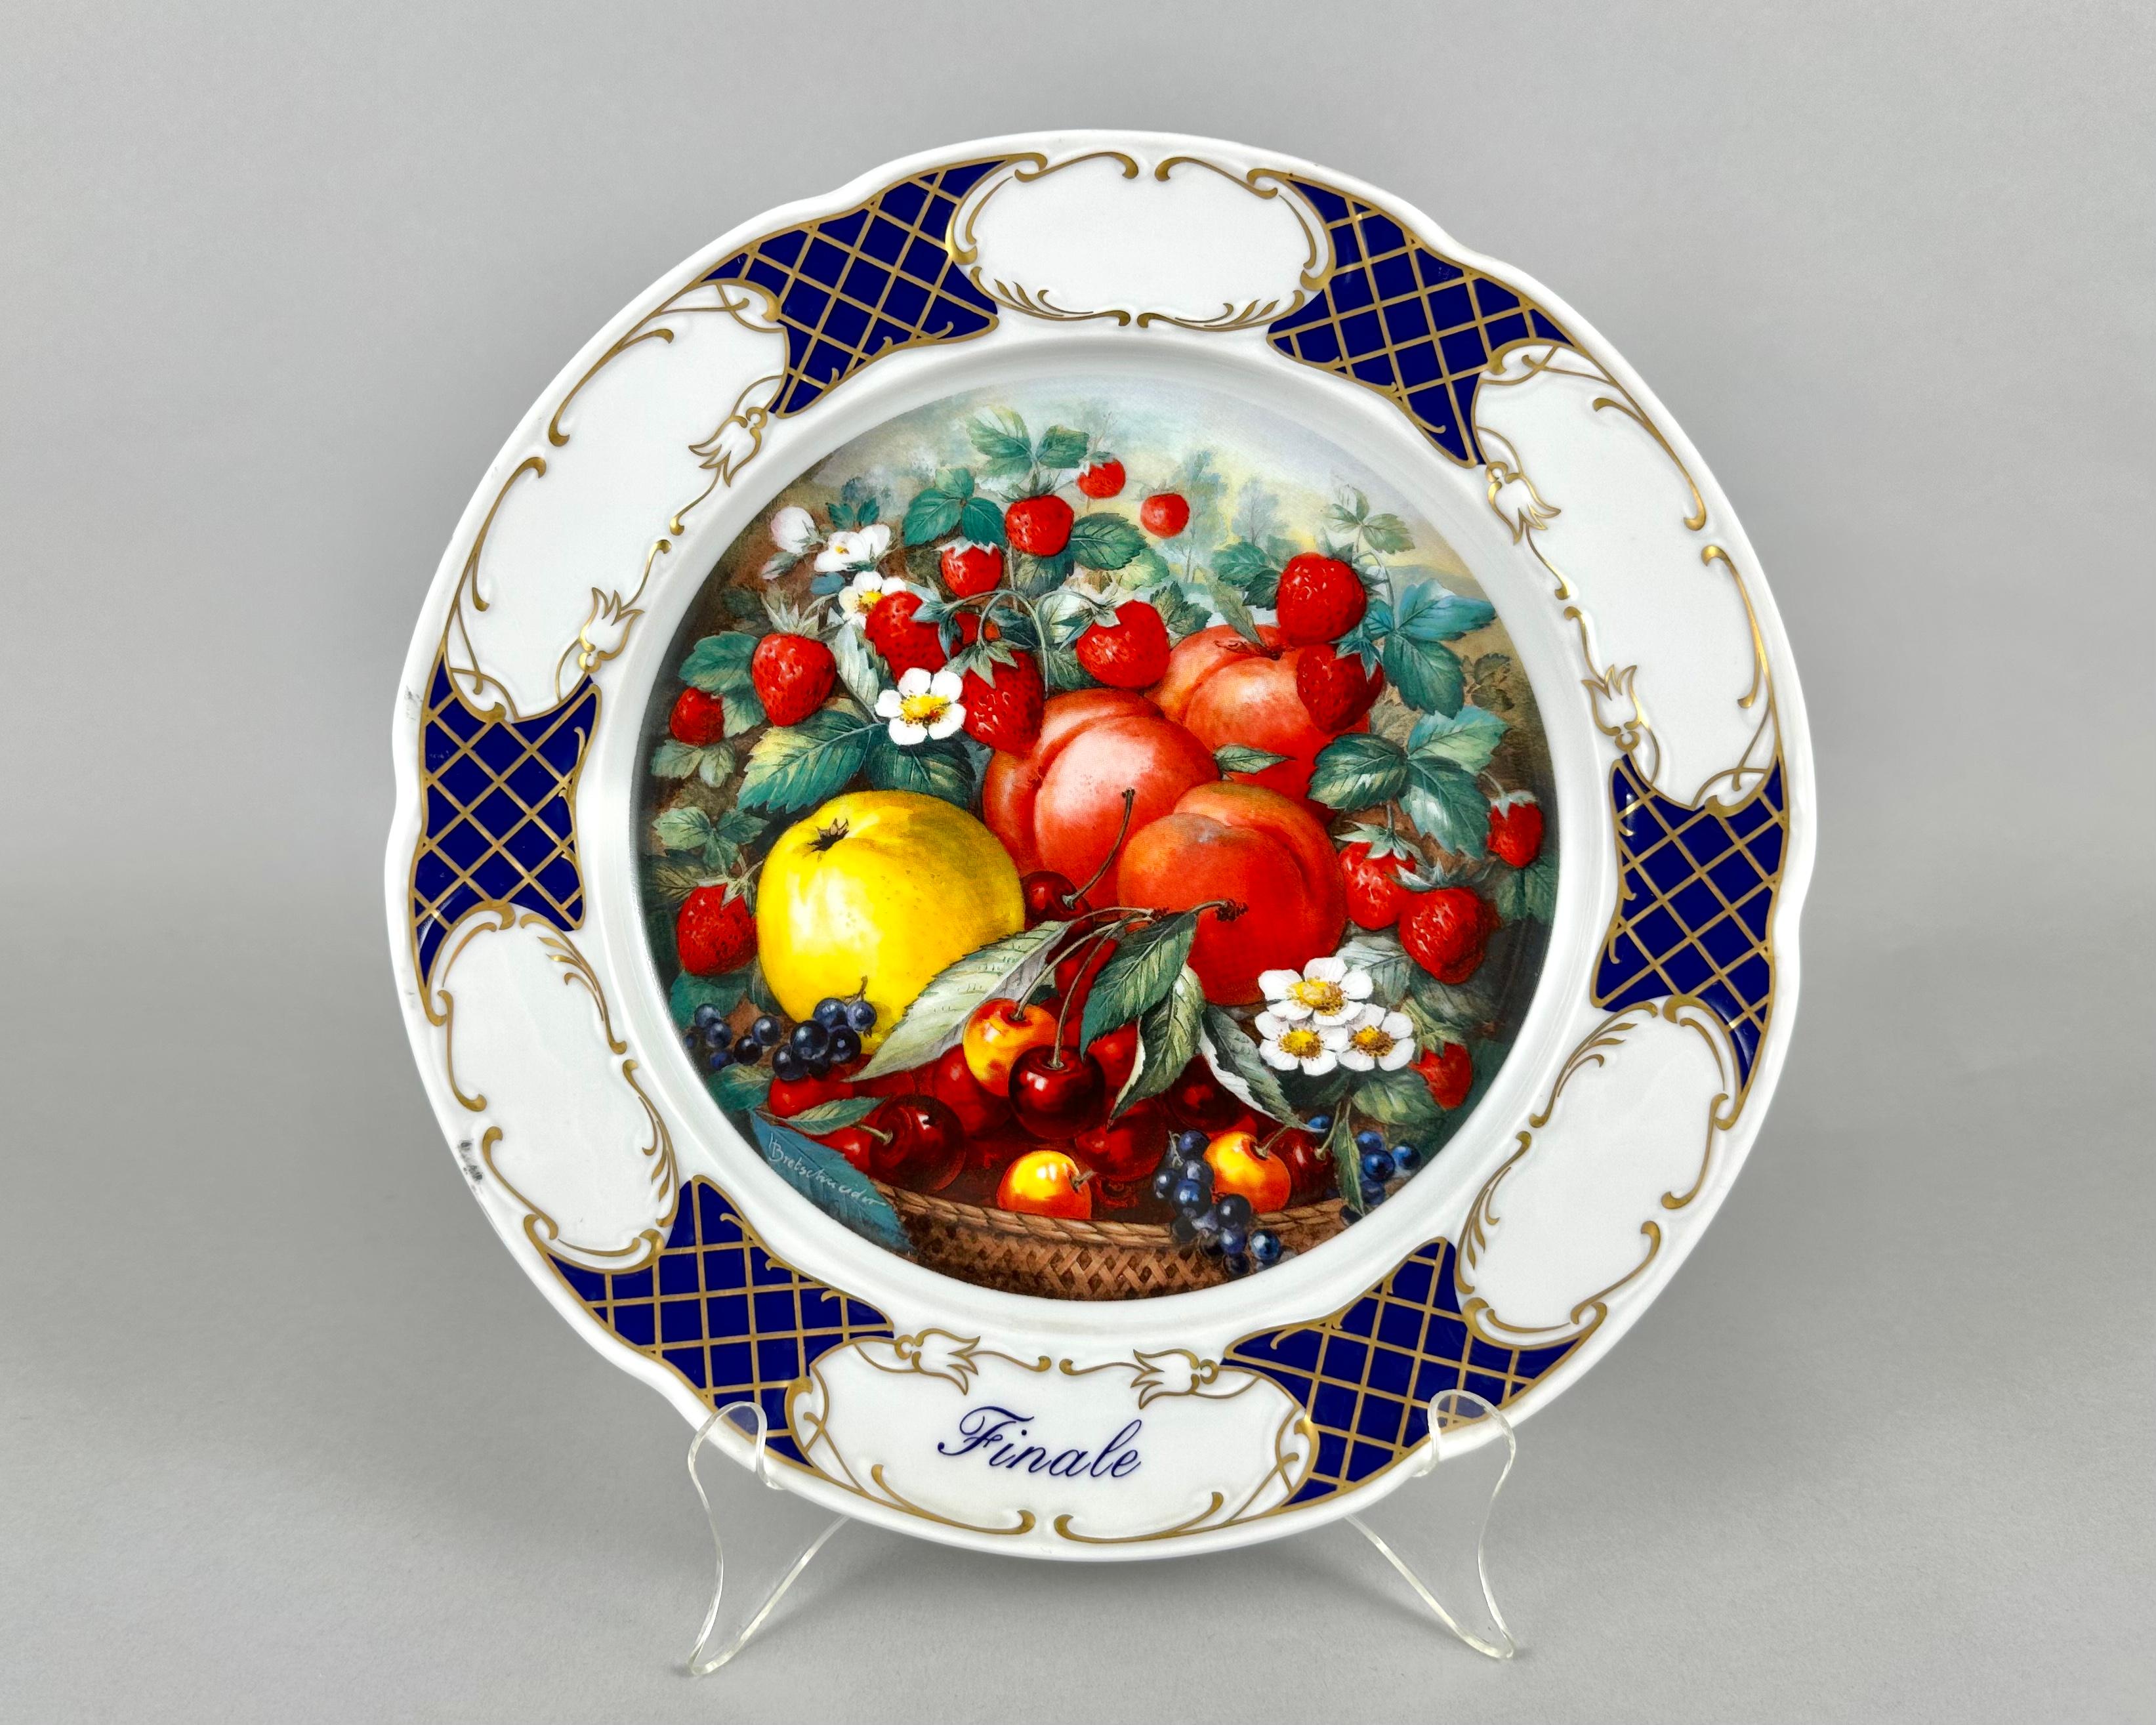 Vintage flat plates with fruits, decorative plates Schirnding, Bavaria 1992.

A complete set of 4 luxurious, decorative wall plates from the famous manufactory Schirnding by German artist MEISSEN Horst Bretschneider, Germany.

Decal with hand